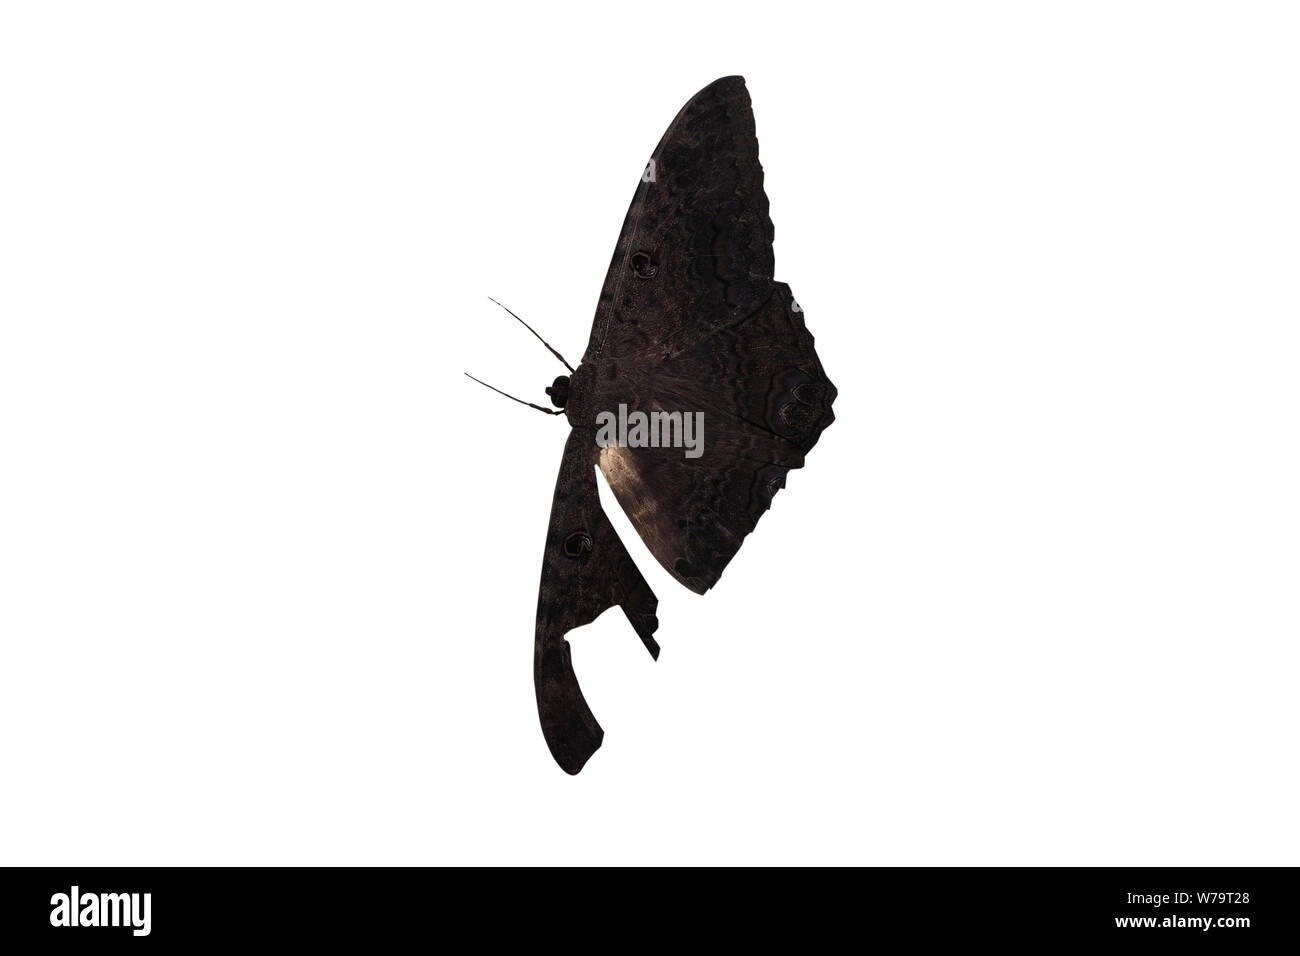 Big black butterfly isolated on white background. One wing is damaged. Stock Photo